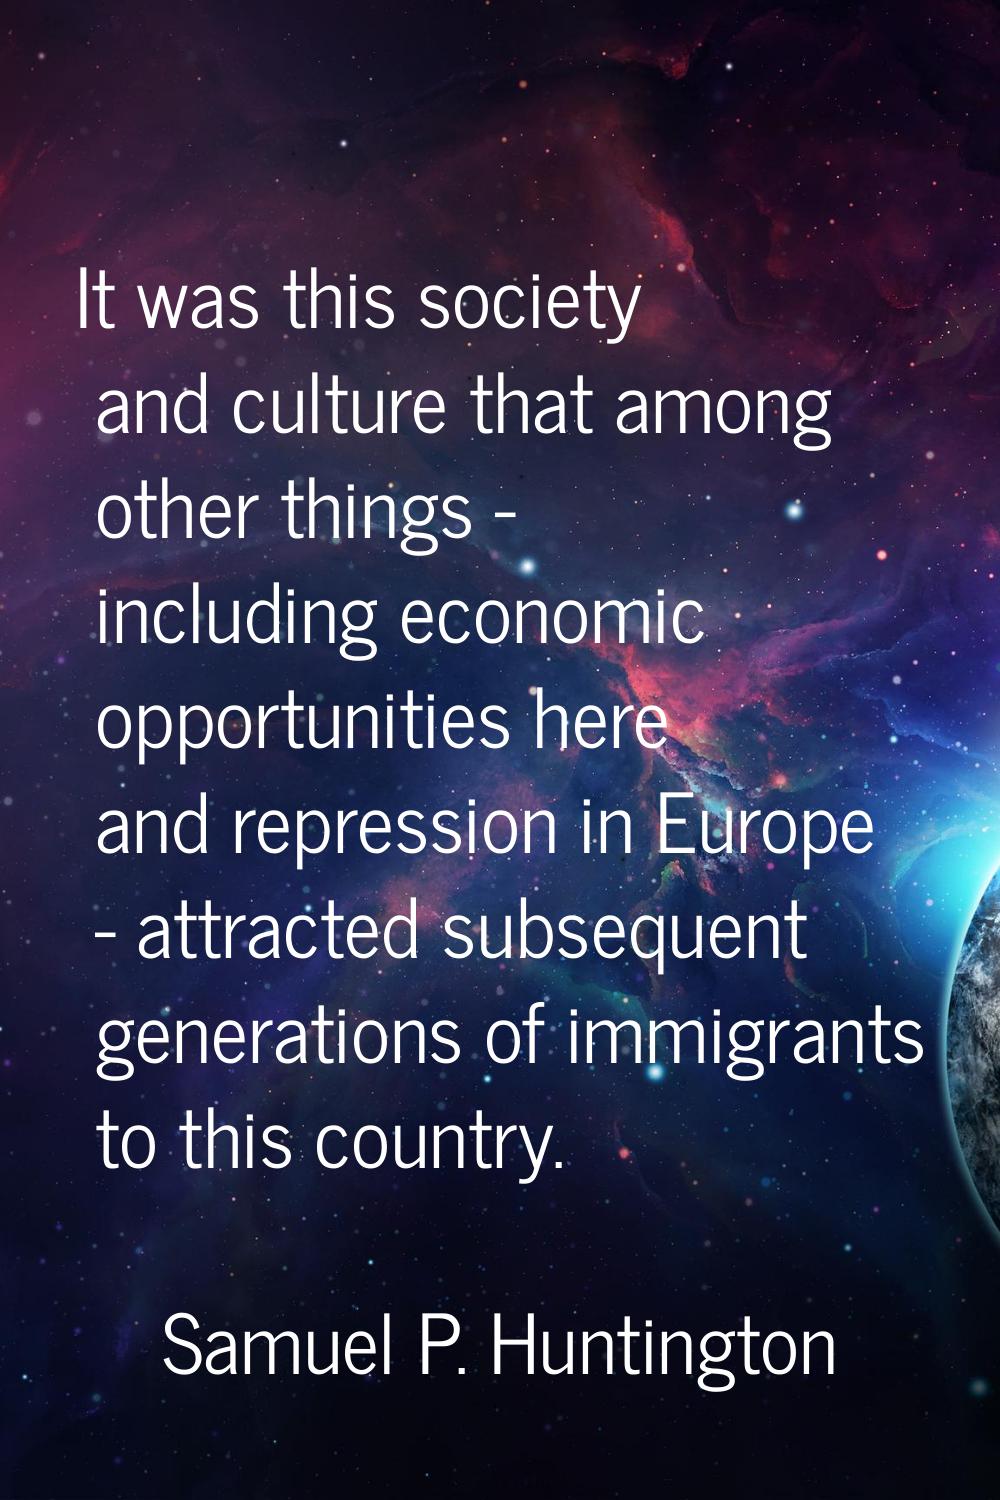 It was this society and culture that among other things - including economic opportunities here and